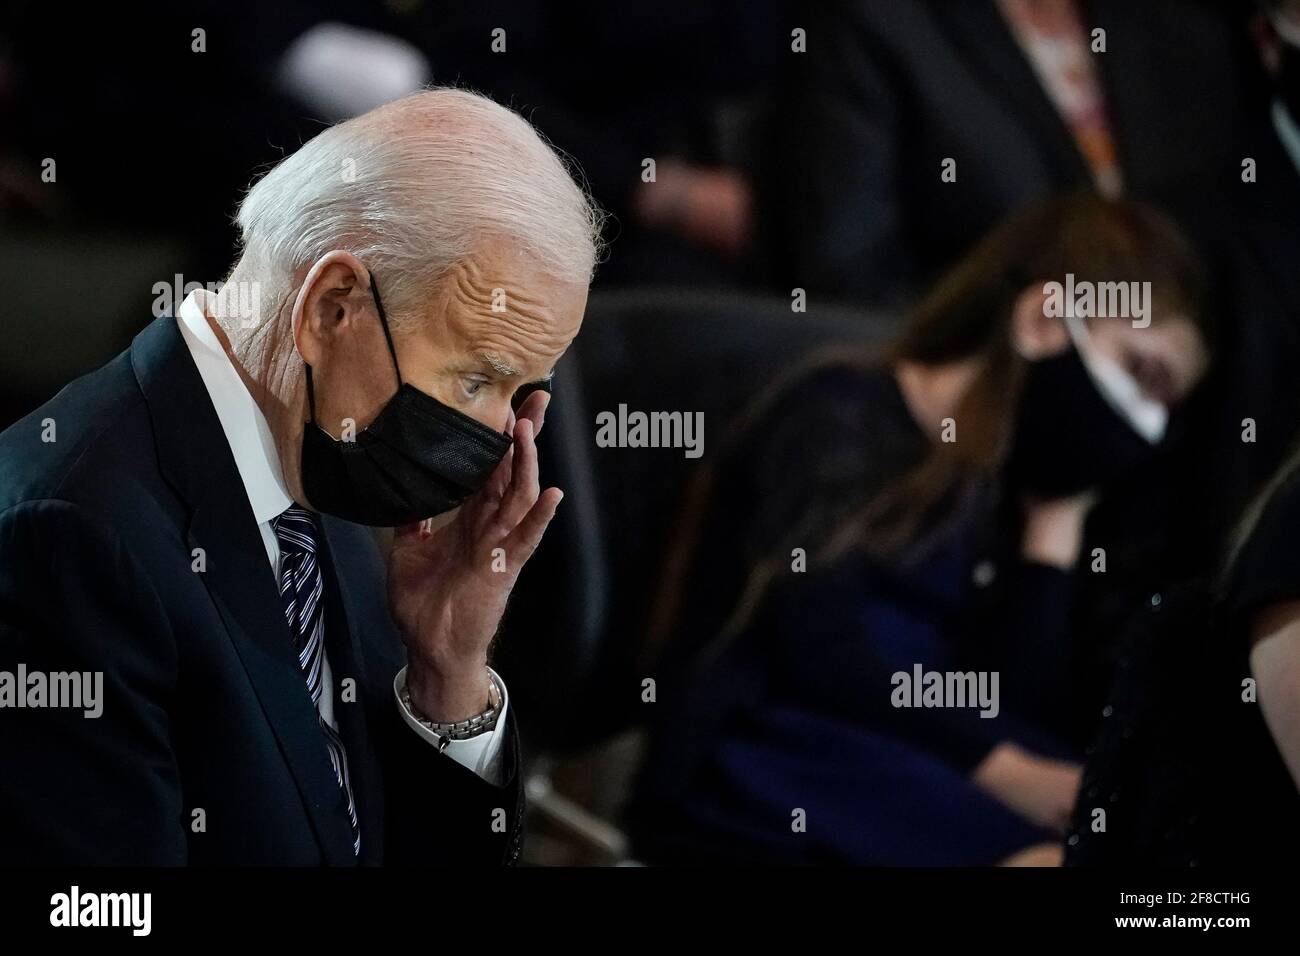 WASHINGTON, DC - APRIL 13: President Joe Biden rubs his eye during a memorial for the late U.S. Capitol Police officer William 'Billy' Evans as he lies in honor in the Rotunda at the U.S. Capitol on April 13, 2021 in Washington, DC. Officer Evans was killed in the line of duty during the attack outside the U.S. Capitol on April 2. He is the sixth Capitol Police officer to die in the line of duty in the nearly 200 years since the force was created. (Photo by Drew Angerer/Pool/Sipa USA) Stock Photo